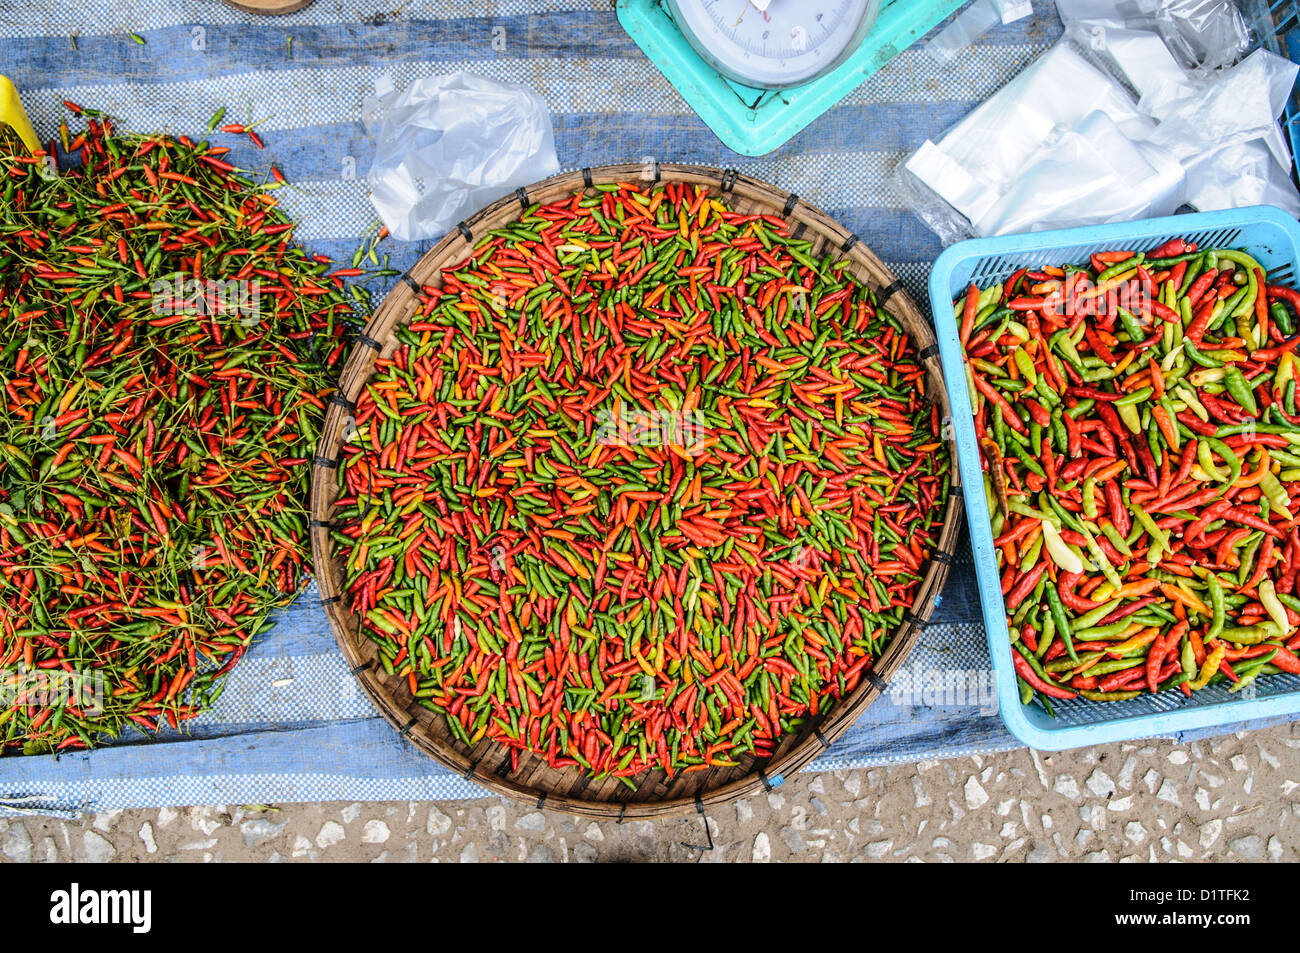 LUANG PRABANG, Laos - Small chili peppers known as Prik Ki Nu (Thailand) or Mak Pet Ki Nuu (Laos). The morning market in Luang Prabang, Laos. Starting early in the morning, local vendors converge on this street in downtown Luang Prabang to sell to locals. Their wares are primarily food, but there are also a few souvenir stalls for the tourists. Stock Photo